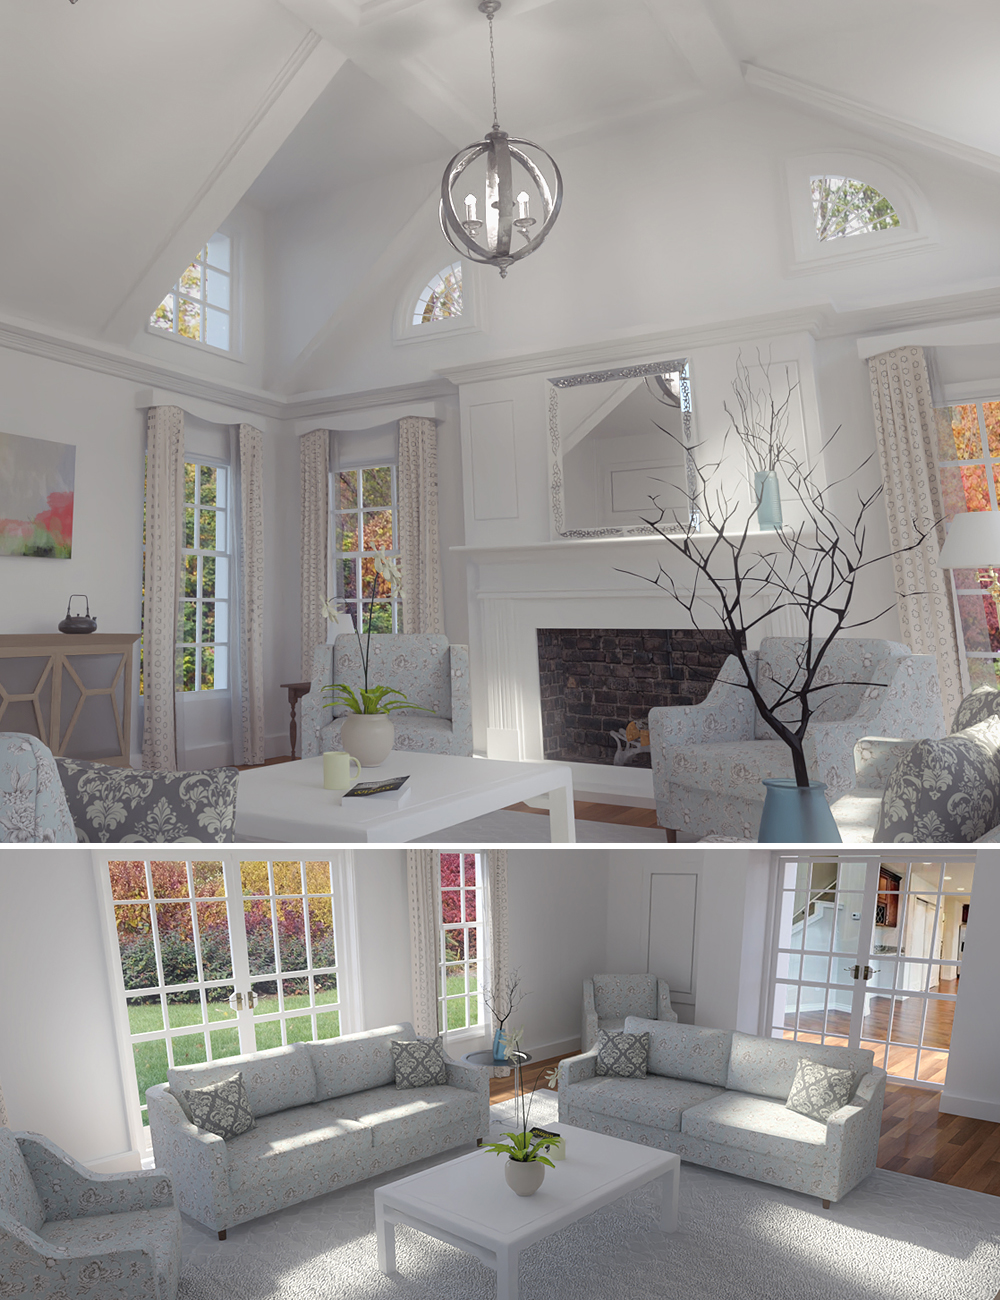 Luxurious Grand Room by: PerspectX, 3D Models by Daz 3D